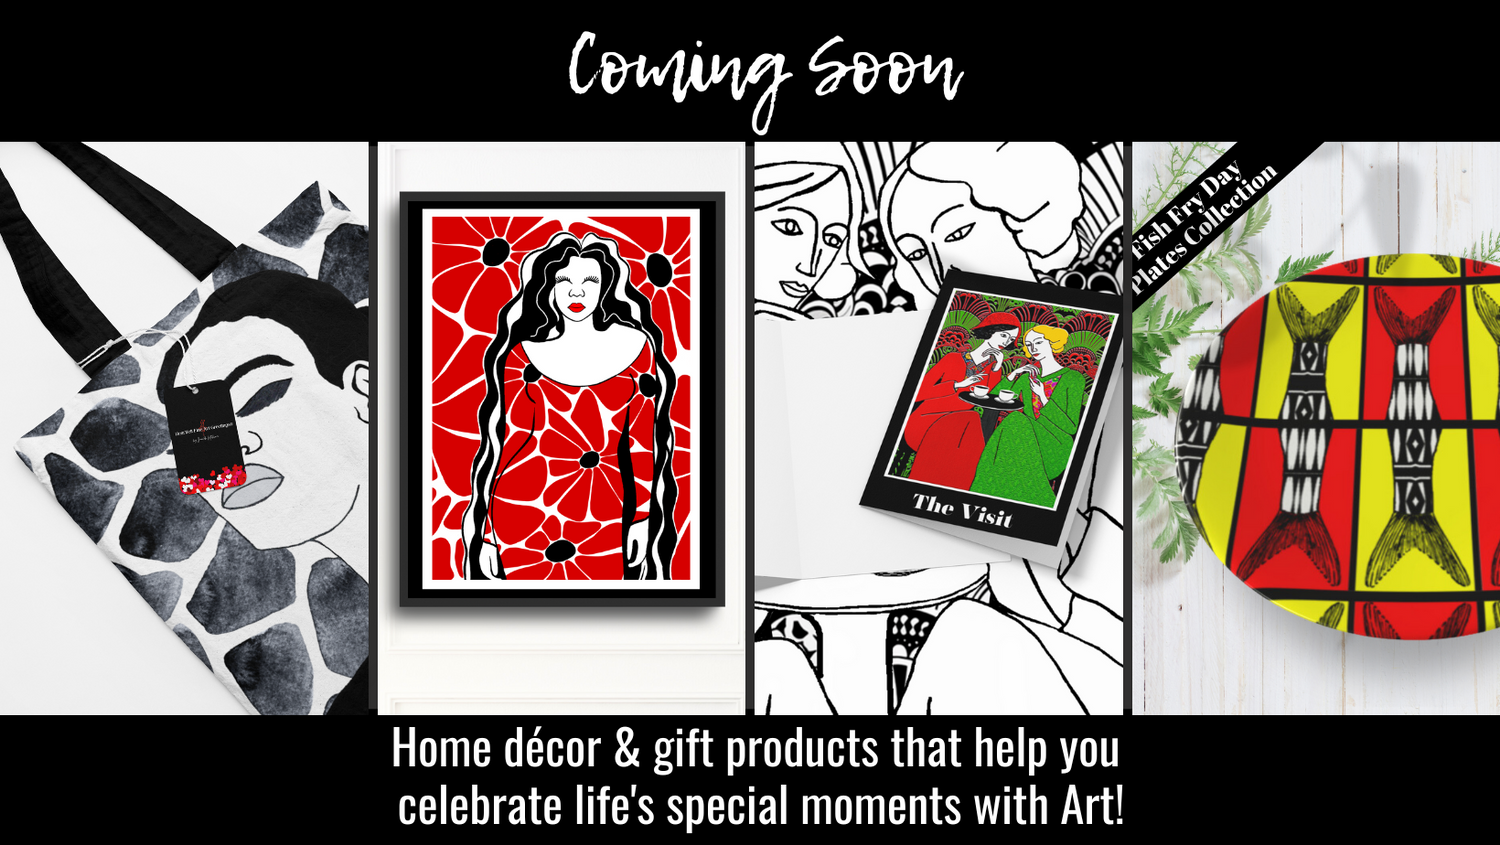 Coming Soon Product Images of Tote bag, Framed Art, Greeting Card, and Fish Fry Plate Collection.